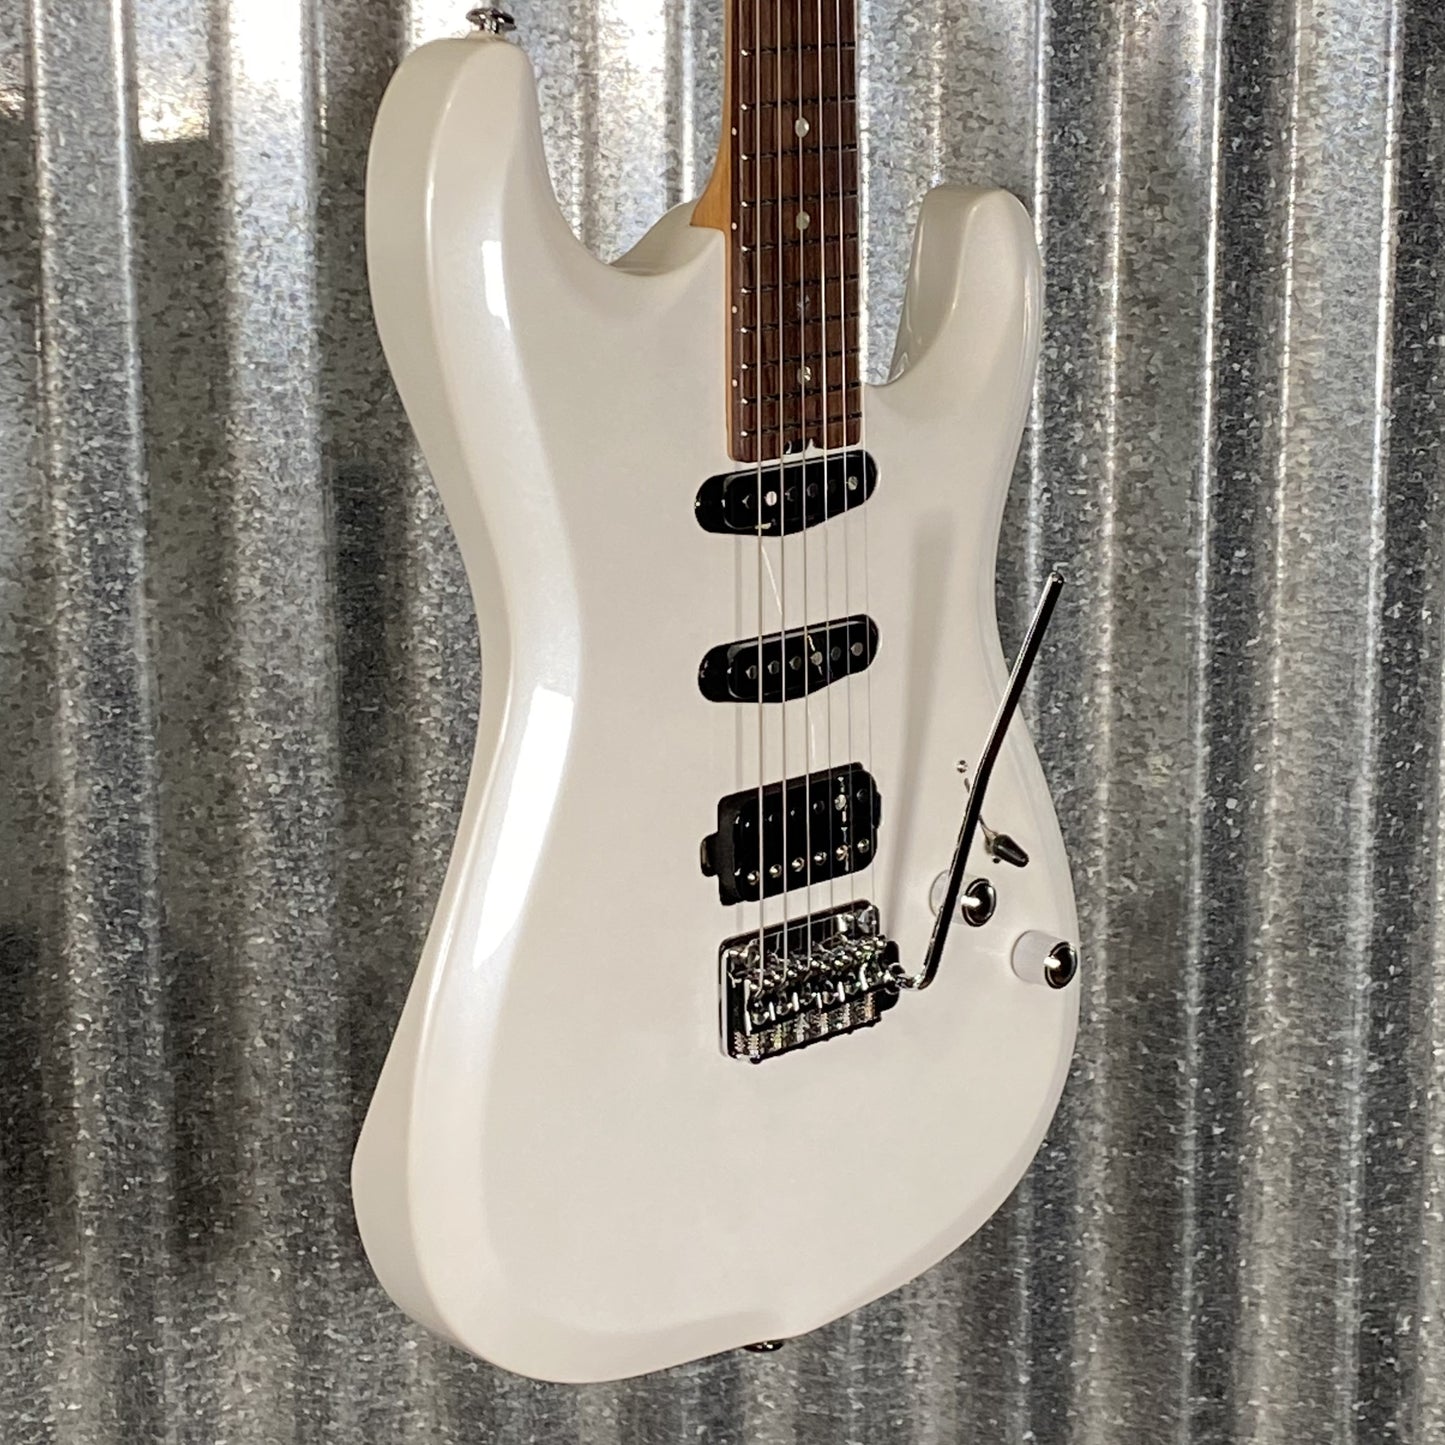 Musi Capricorn Fusion HSS Superstrat Pearl White Guitar #0185 Used